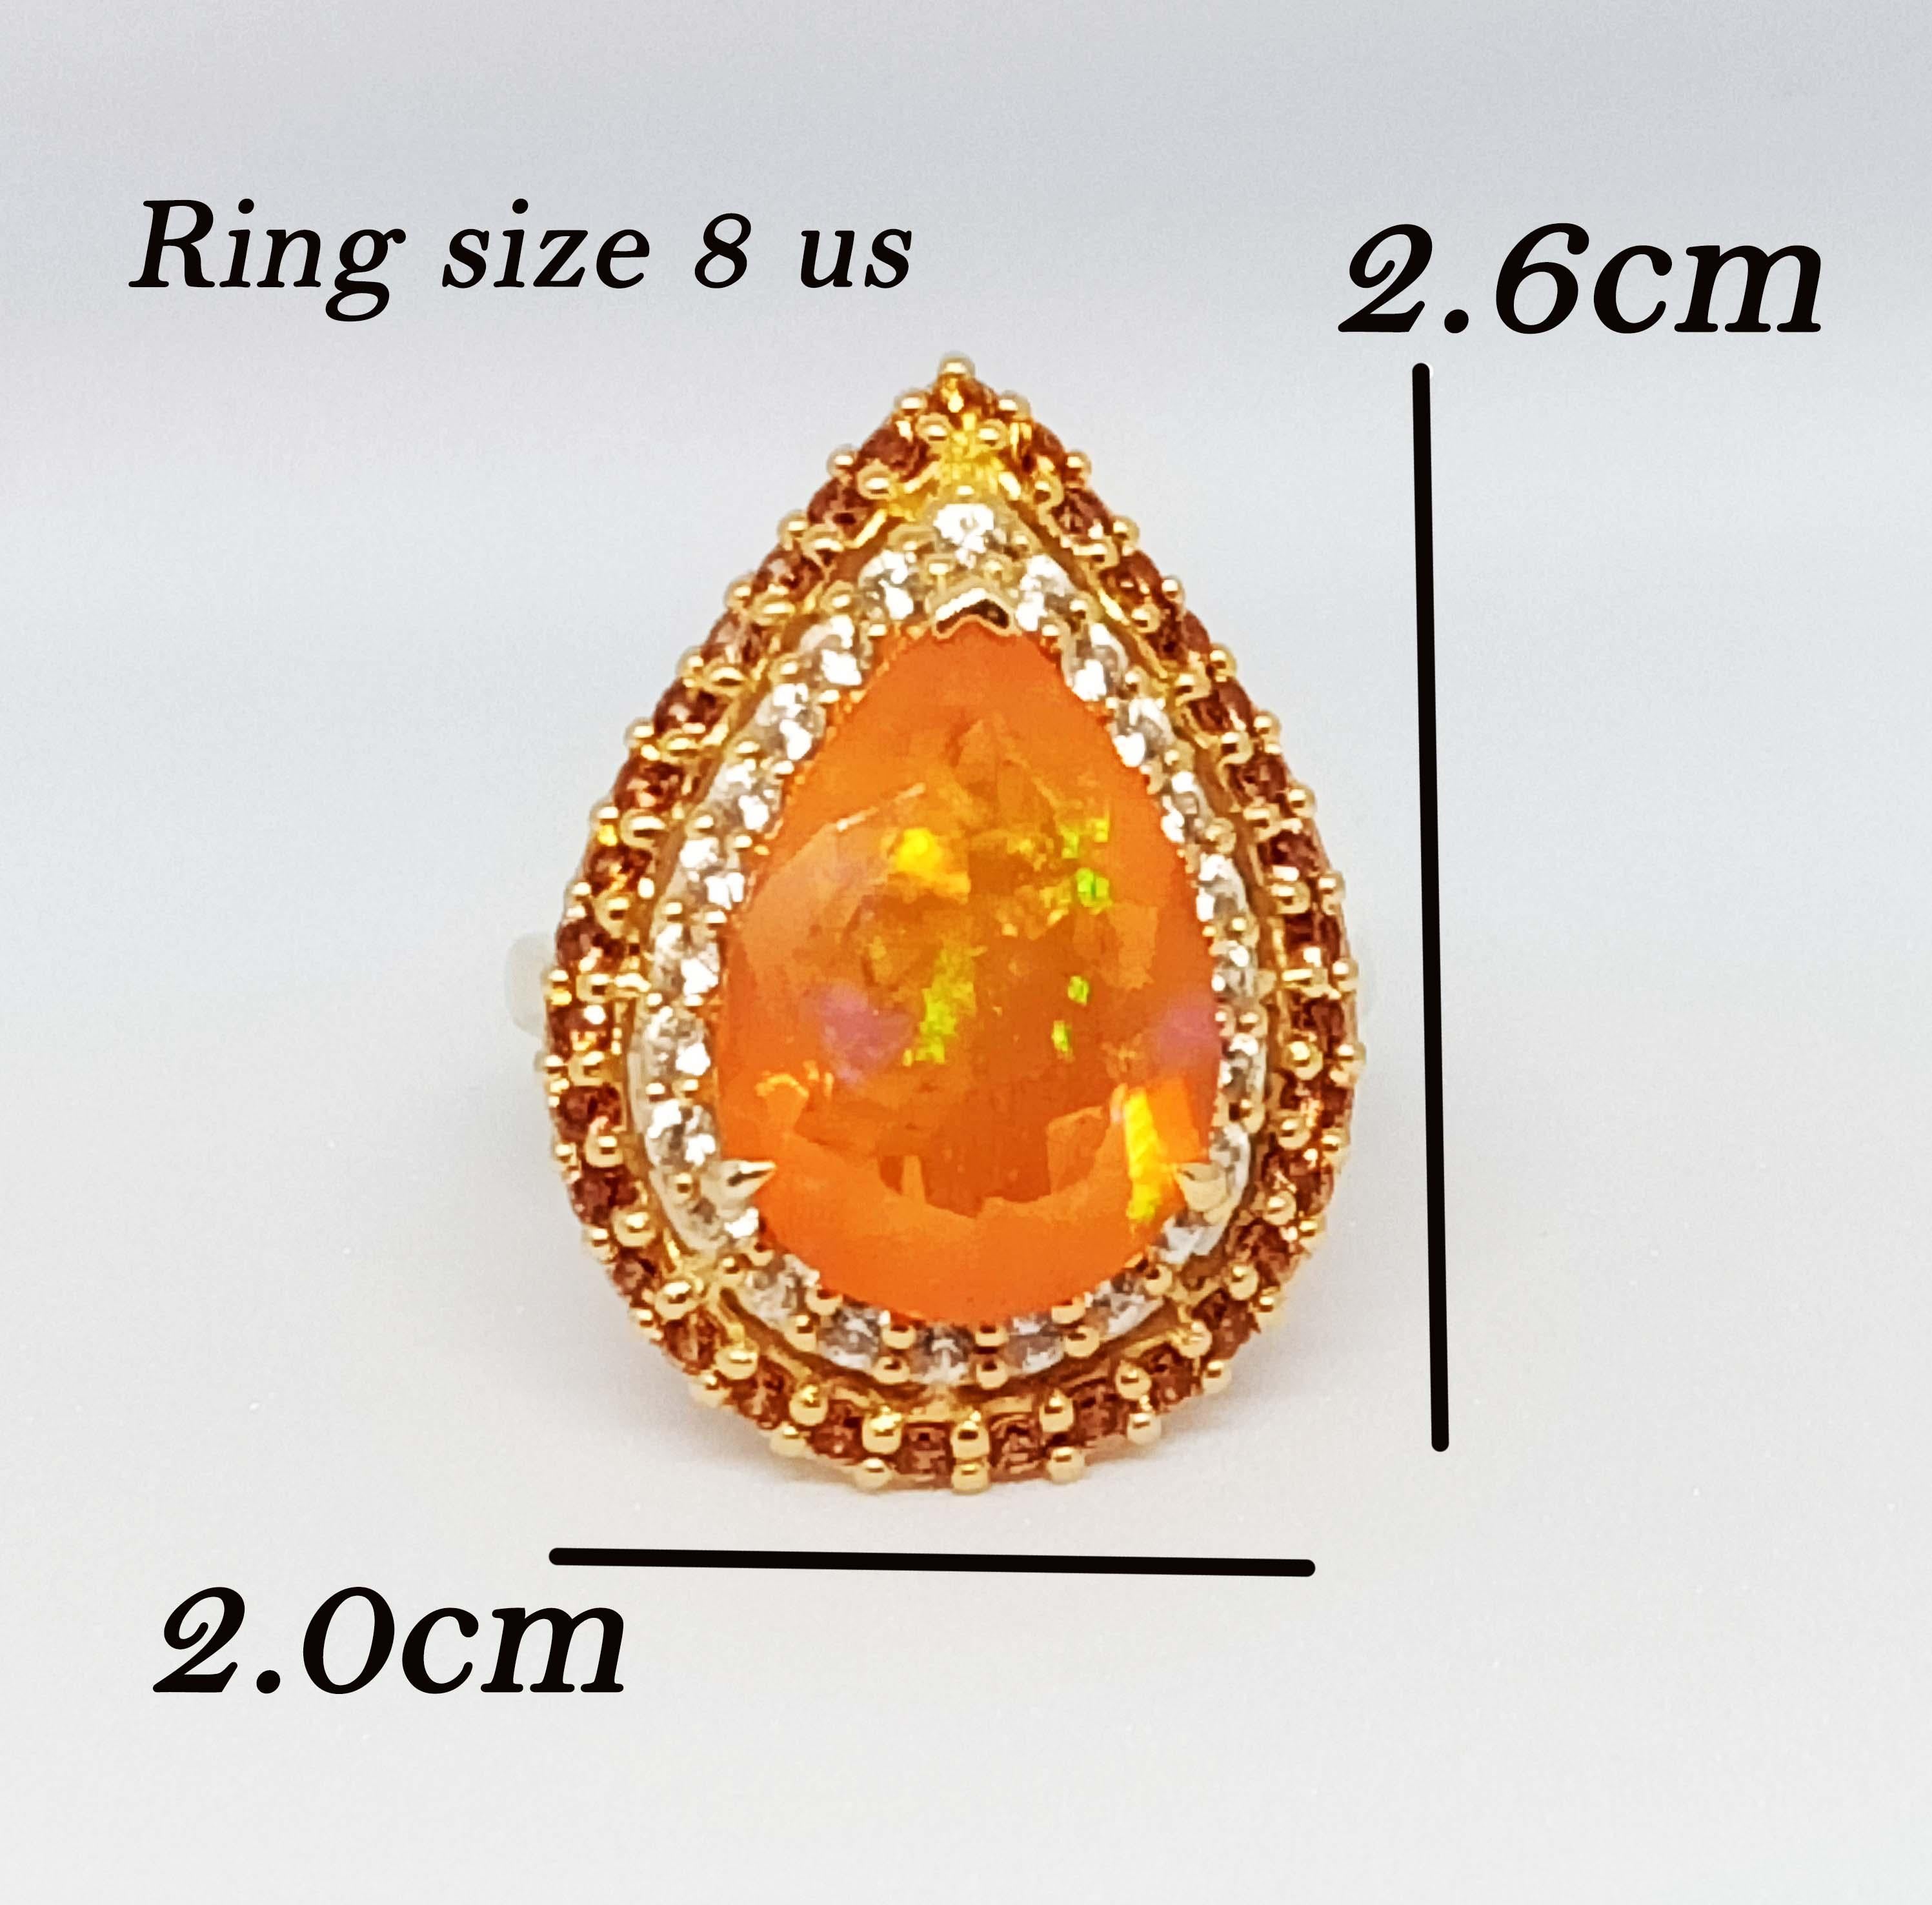 Orange Opal       Pear 17.2x12 mm.  7.86 cts.
Orange sapphire Round. 1.8 mm. 33 pcs.
White Zircon        Round. 1.8 mm. 24 pcs.

Sterling Silver on 18K gold Plated.

Ring : Size 8 usa.


